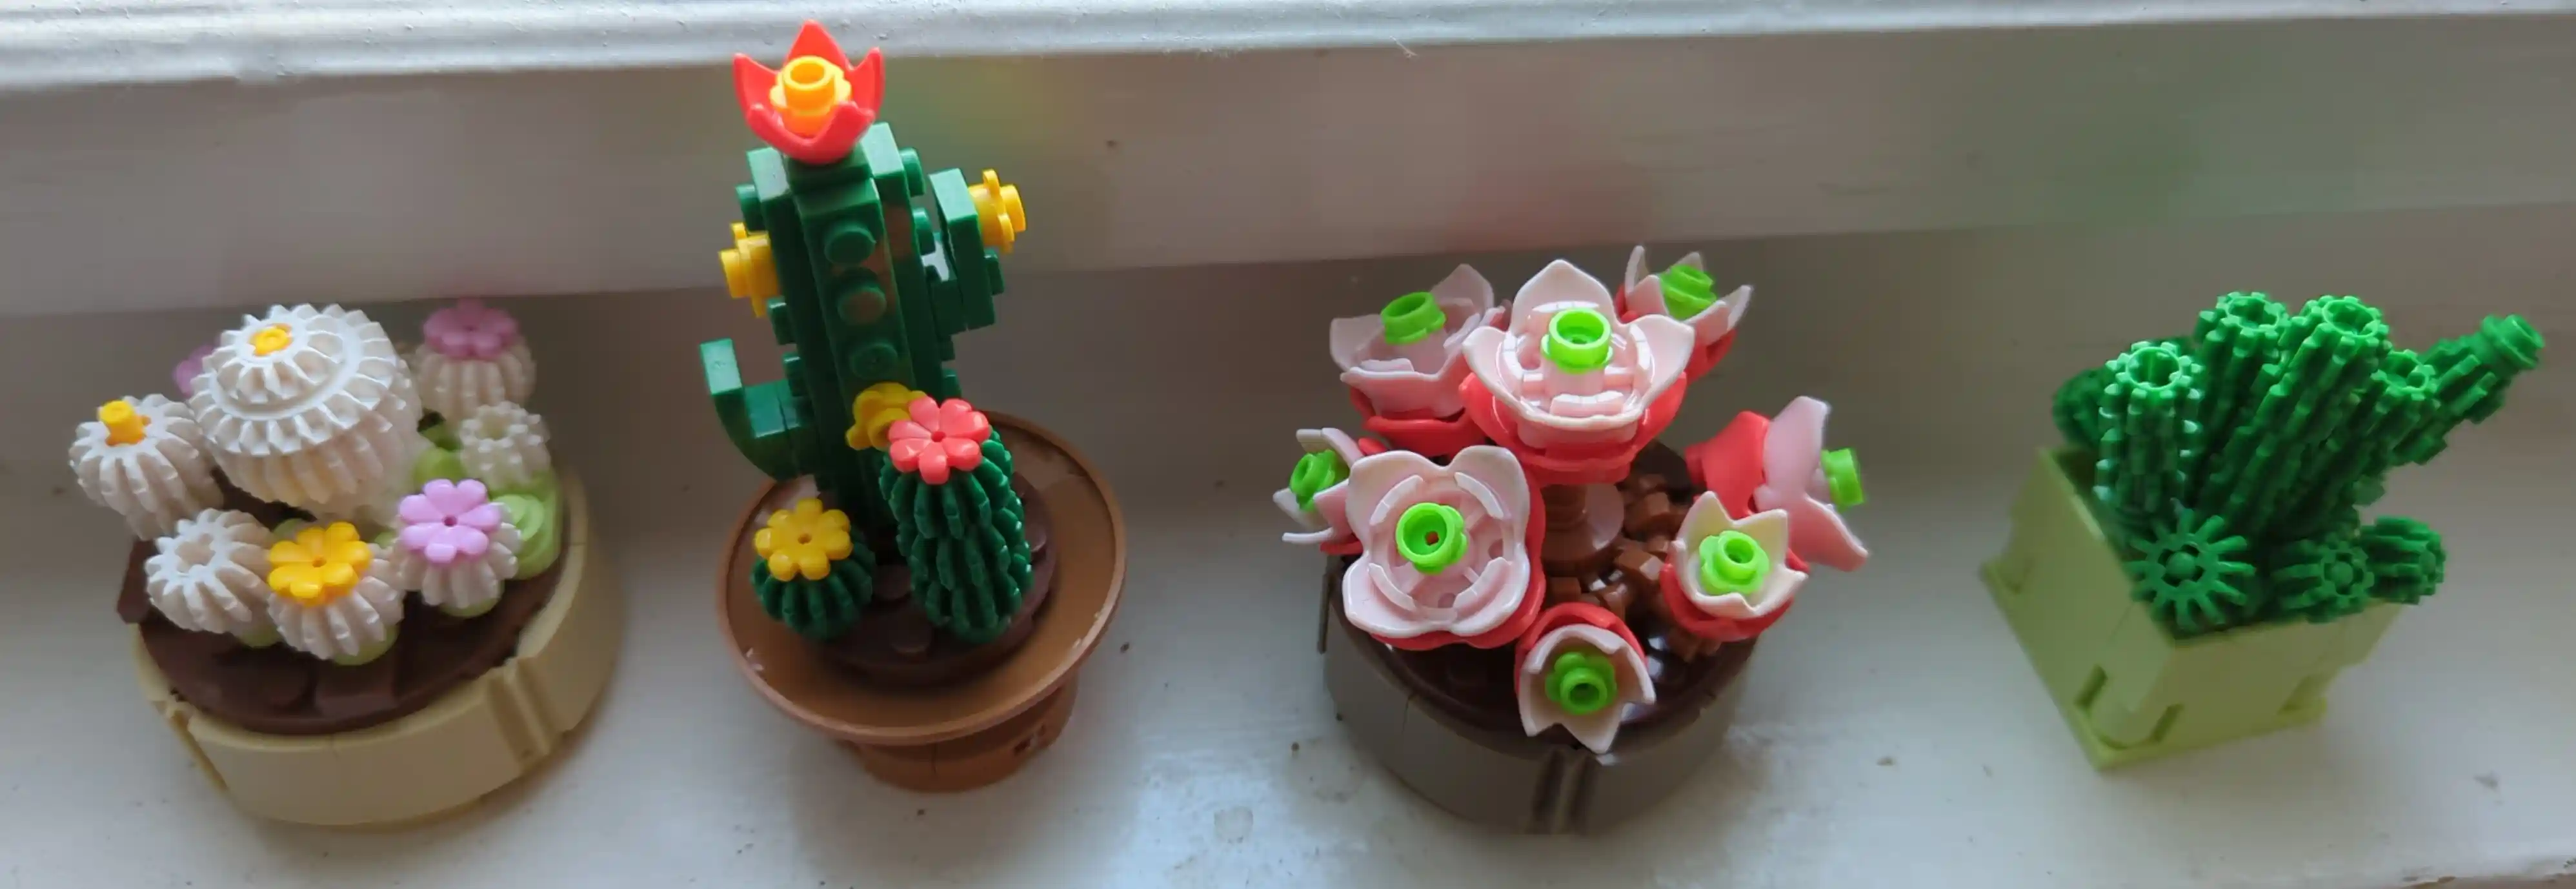 Four small potted succulents, made from studded bricks